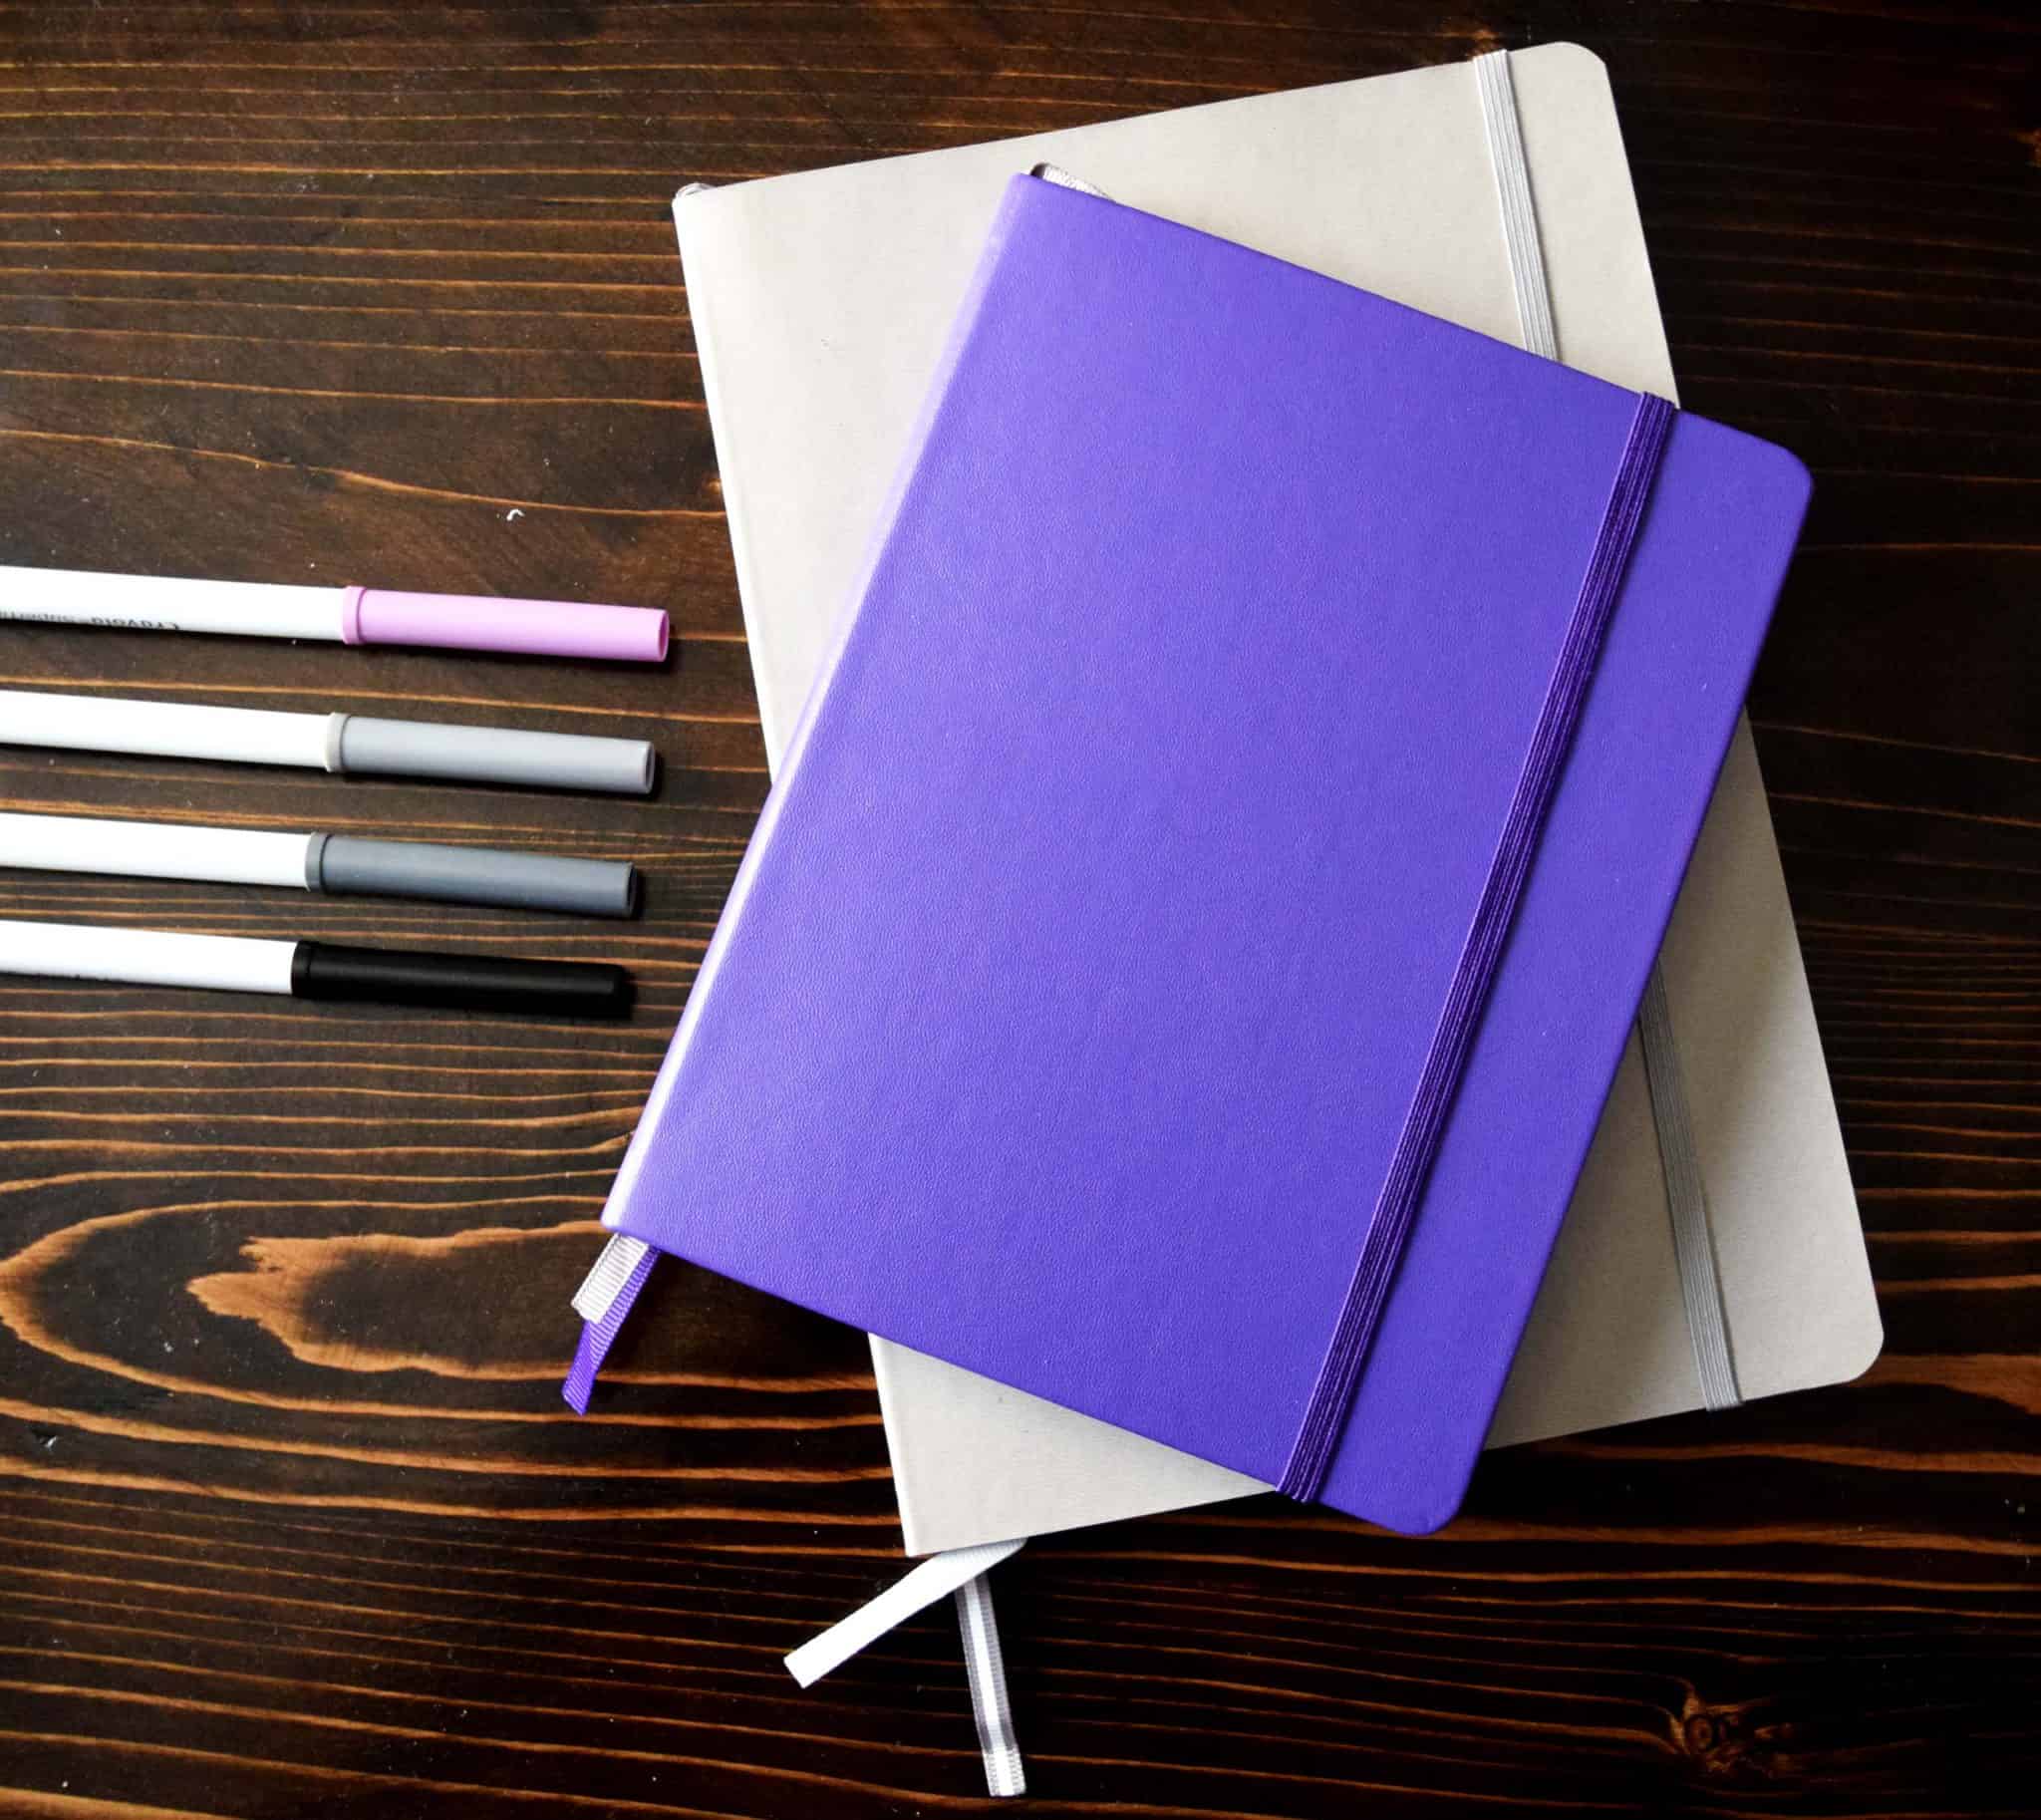 Where to Buy a Bullet Journal (Including the Most Popular Bullet